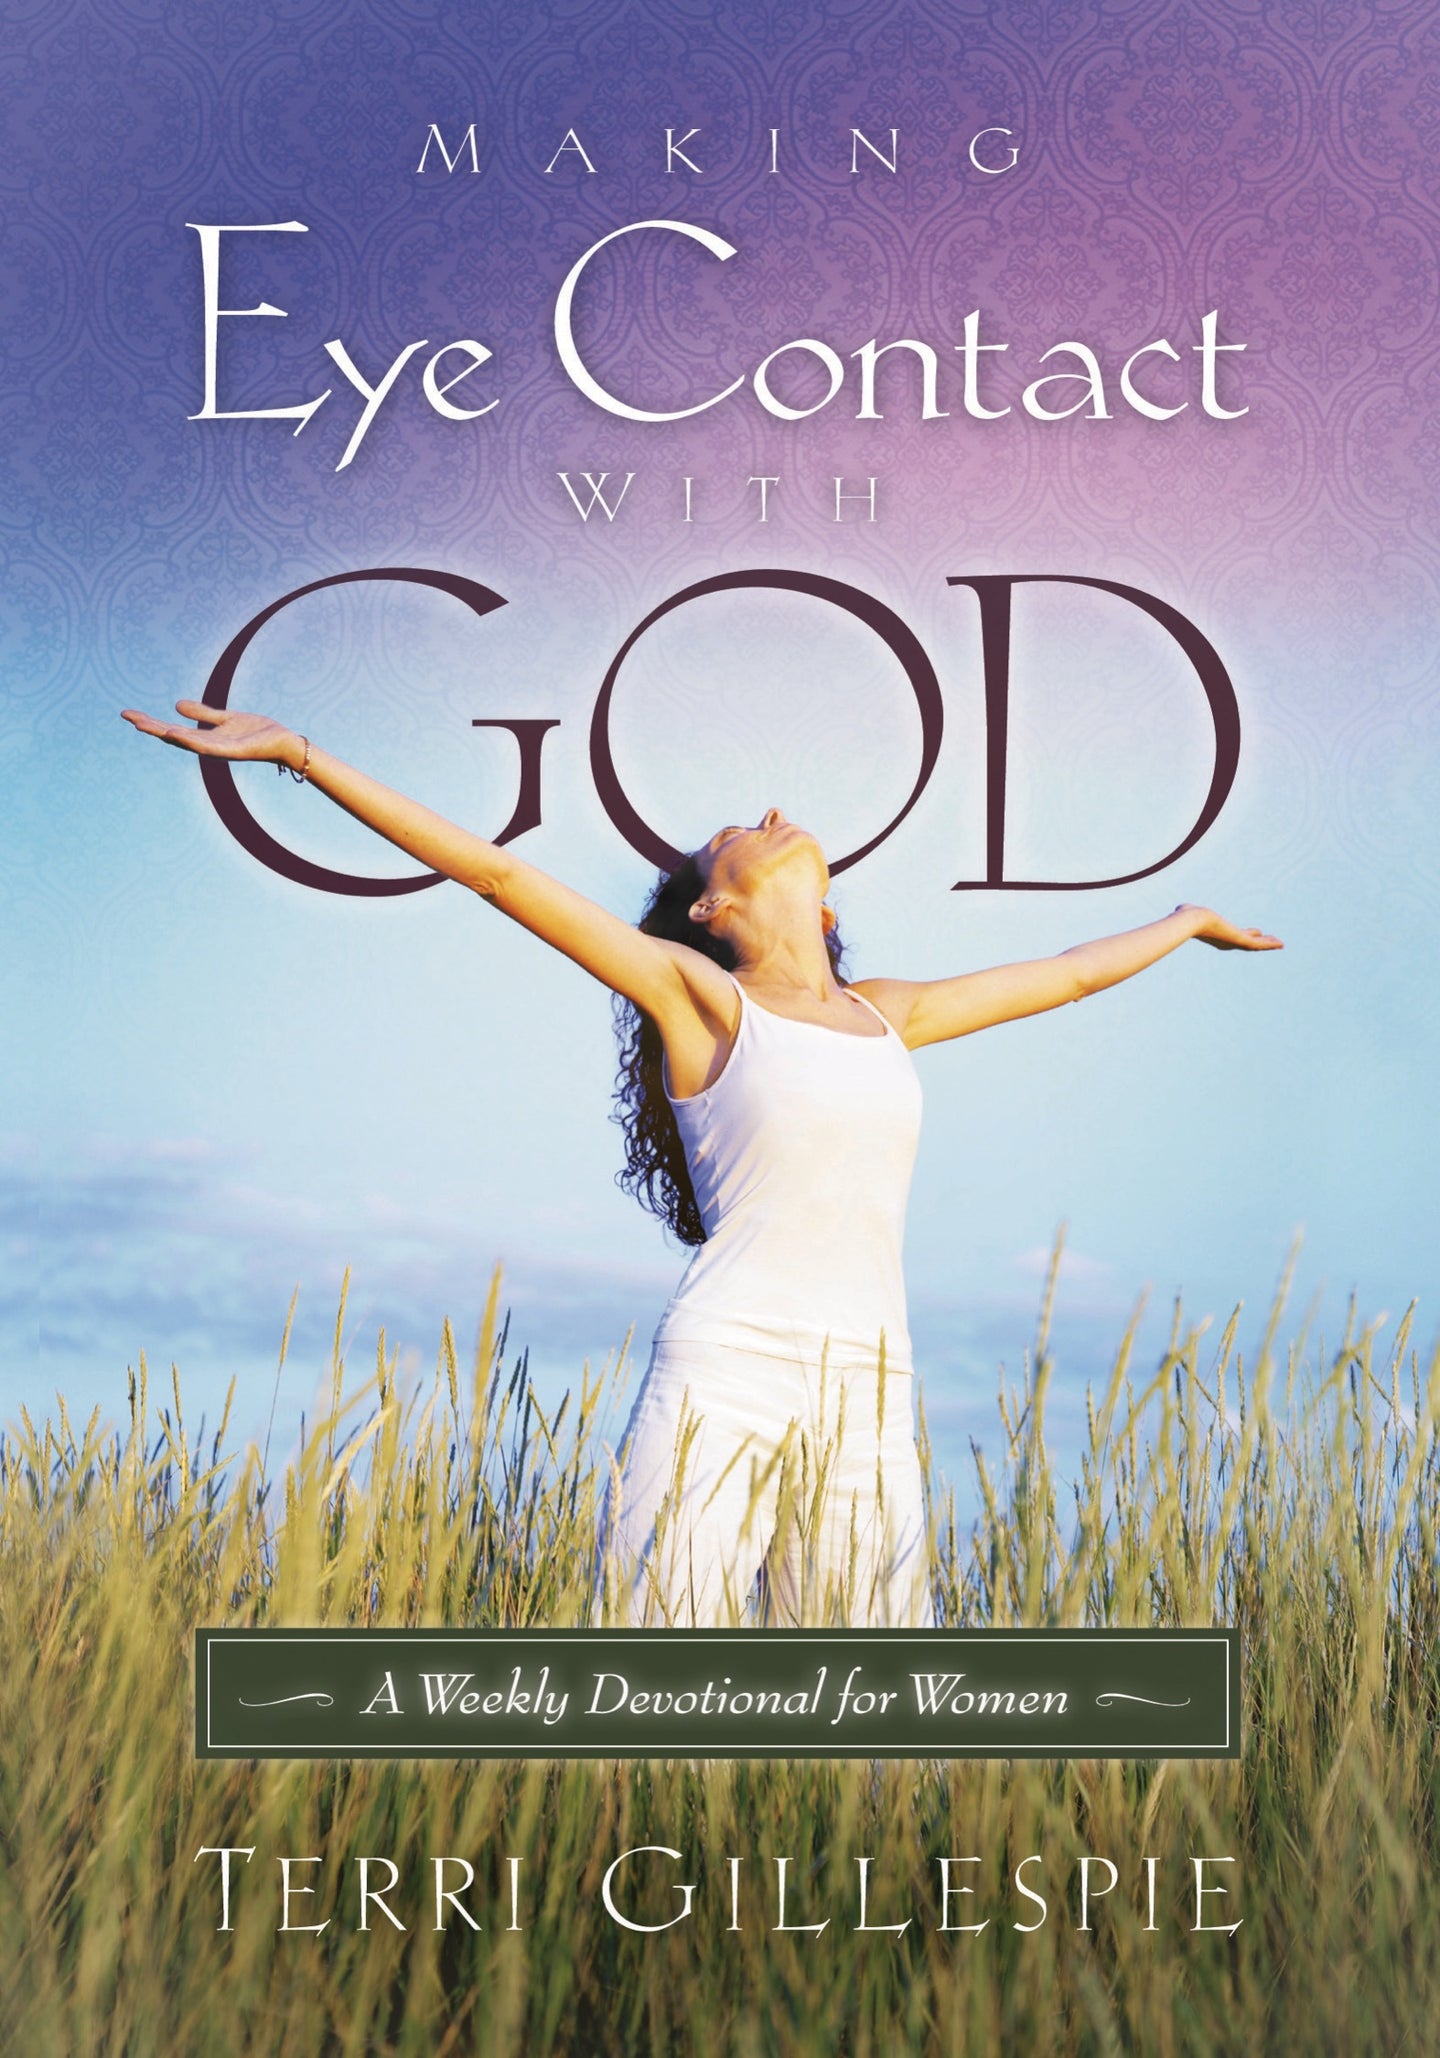 Making Eye Contact With God: A Weekly Devotional for Women by Terri Gillespie